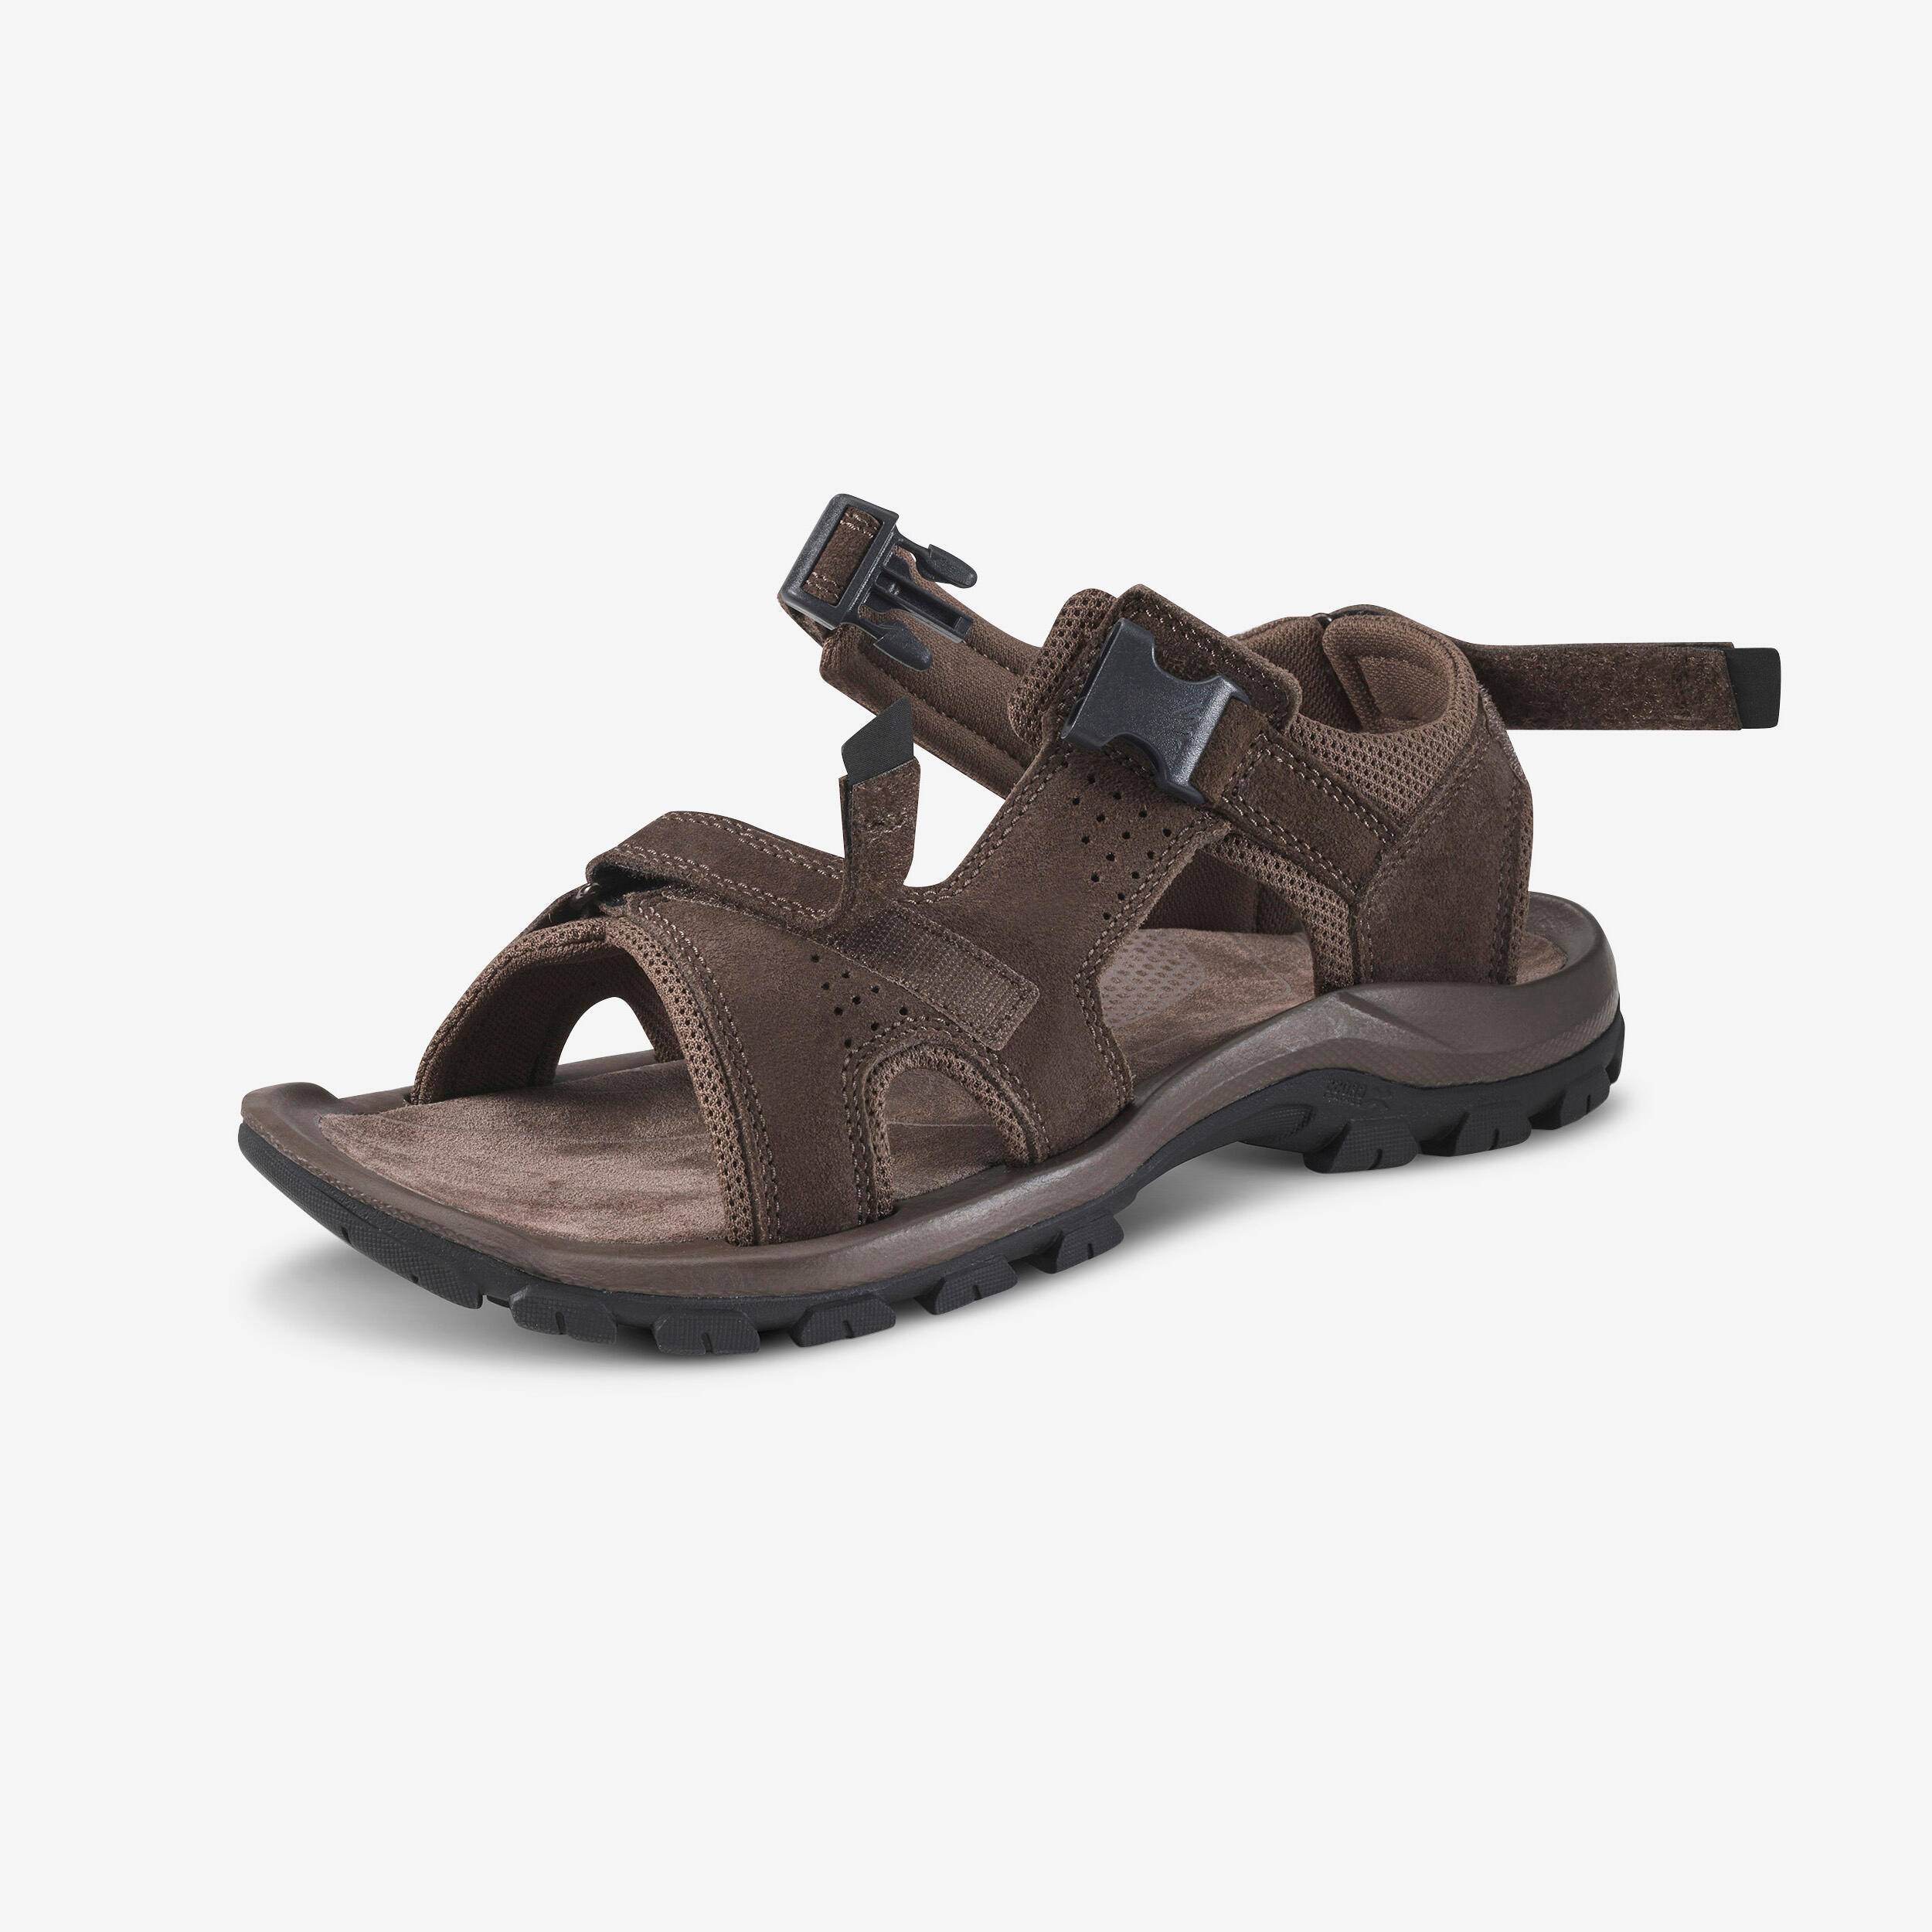 QUECHUA Men's Leather Hiking Sandals NH500